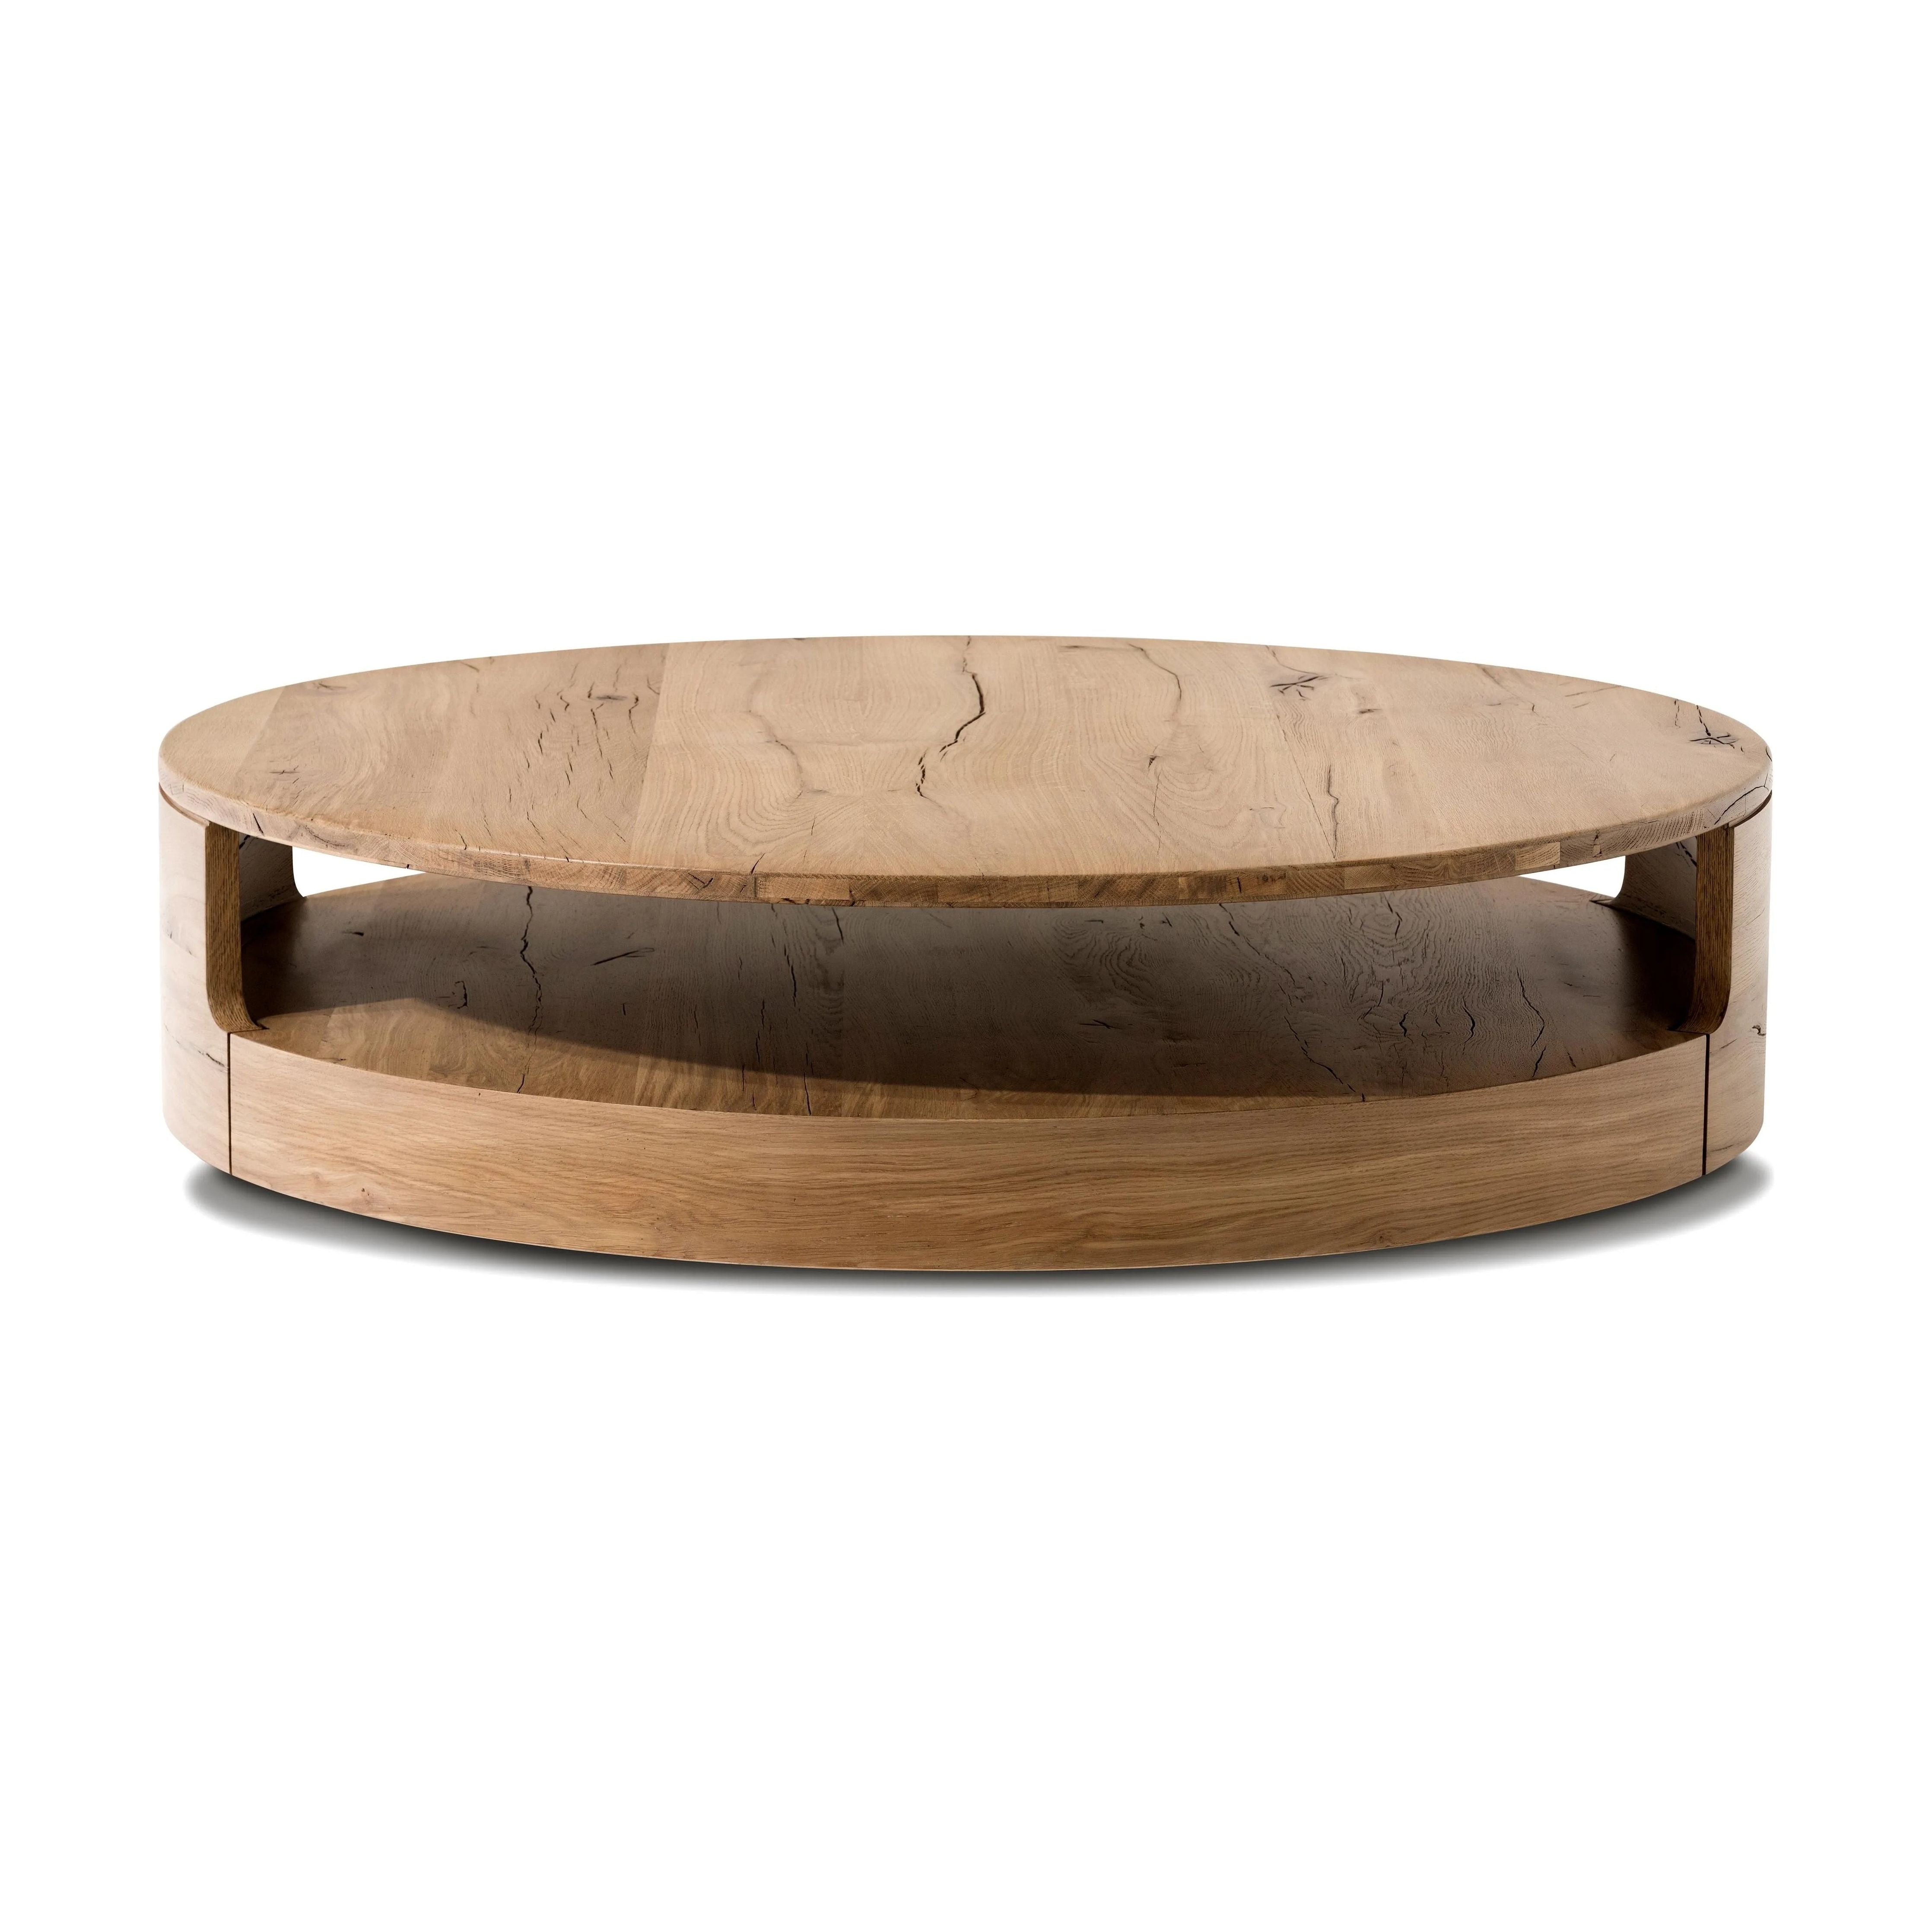 Designed in partnership with longtime Four Hands collaborator Thomas Bina and Brazilian designer Ronald Sasson. A rounded coffee table made from reclaimed French oak, features beautiful natural graining. Lower layer lightens the whole look, while brining the option for bonus storage or display.Collection: Bin Amethyst Home provides interior design, new home construction design consulting, vintage area rugs, and lighting in the Dallas metro area.